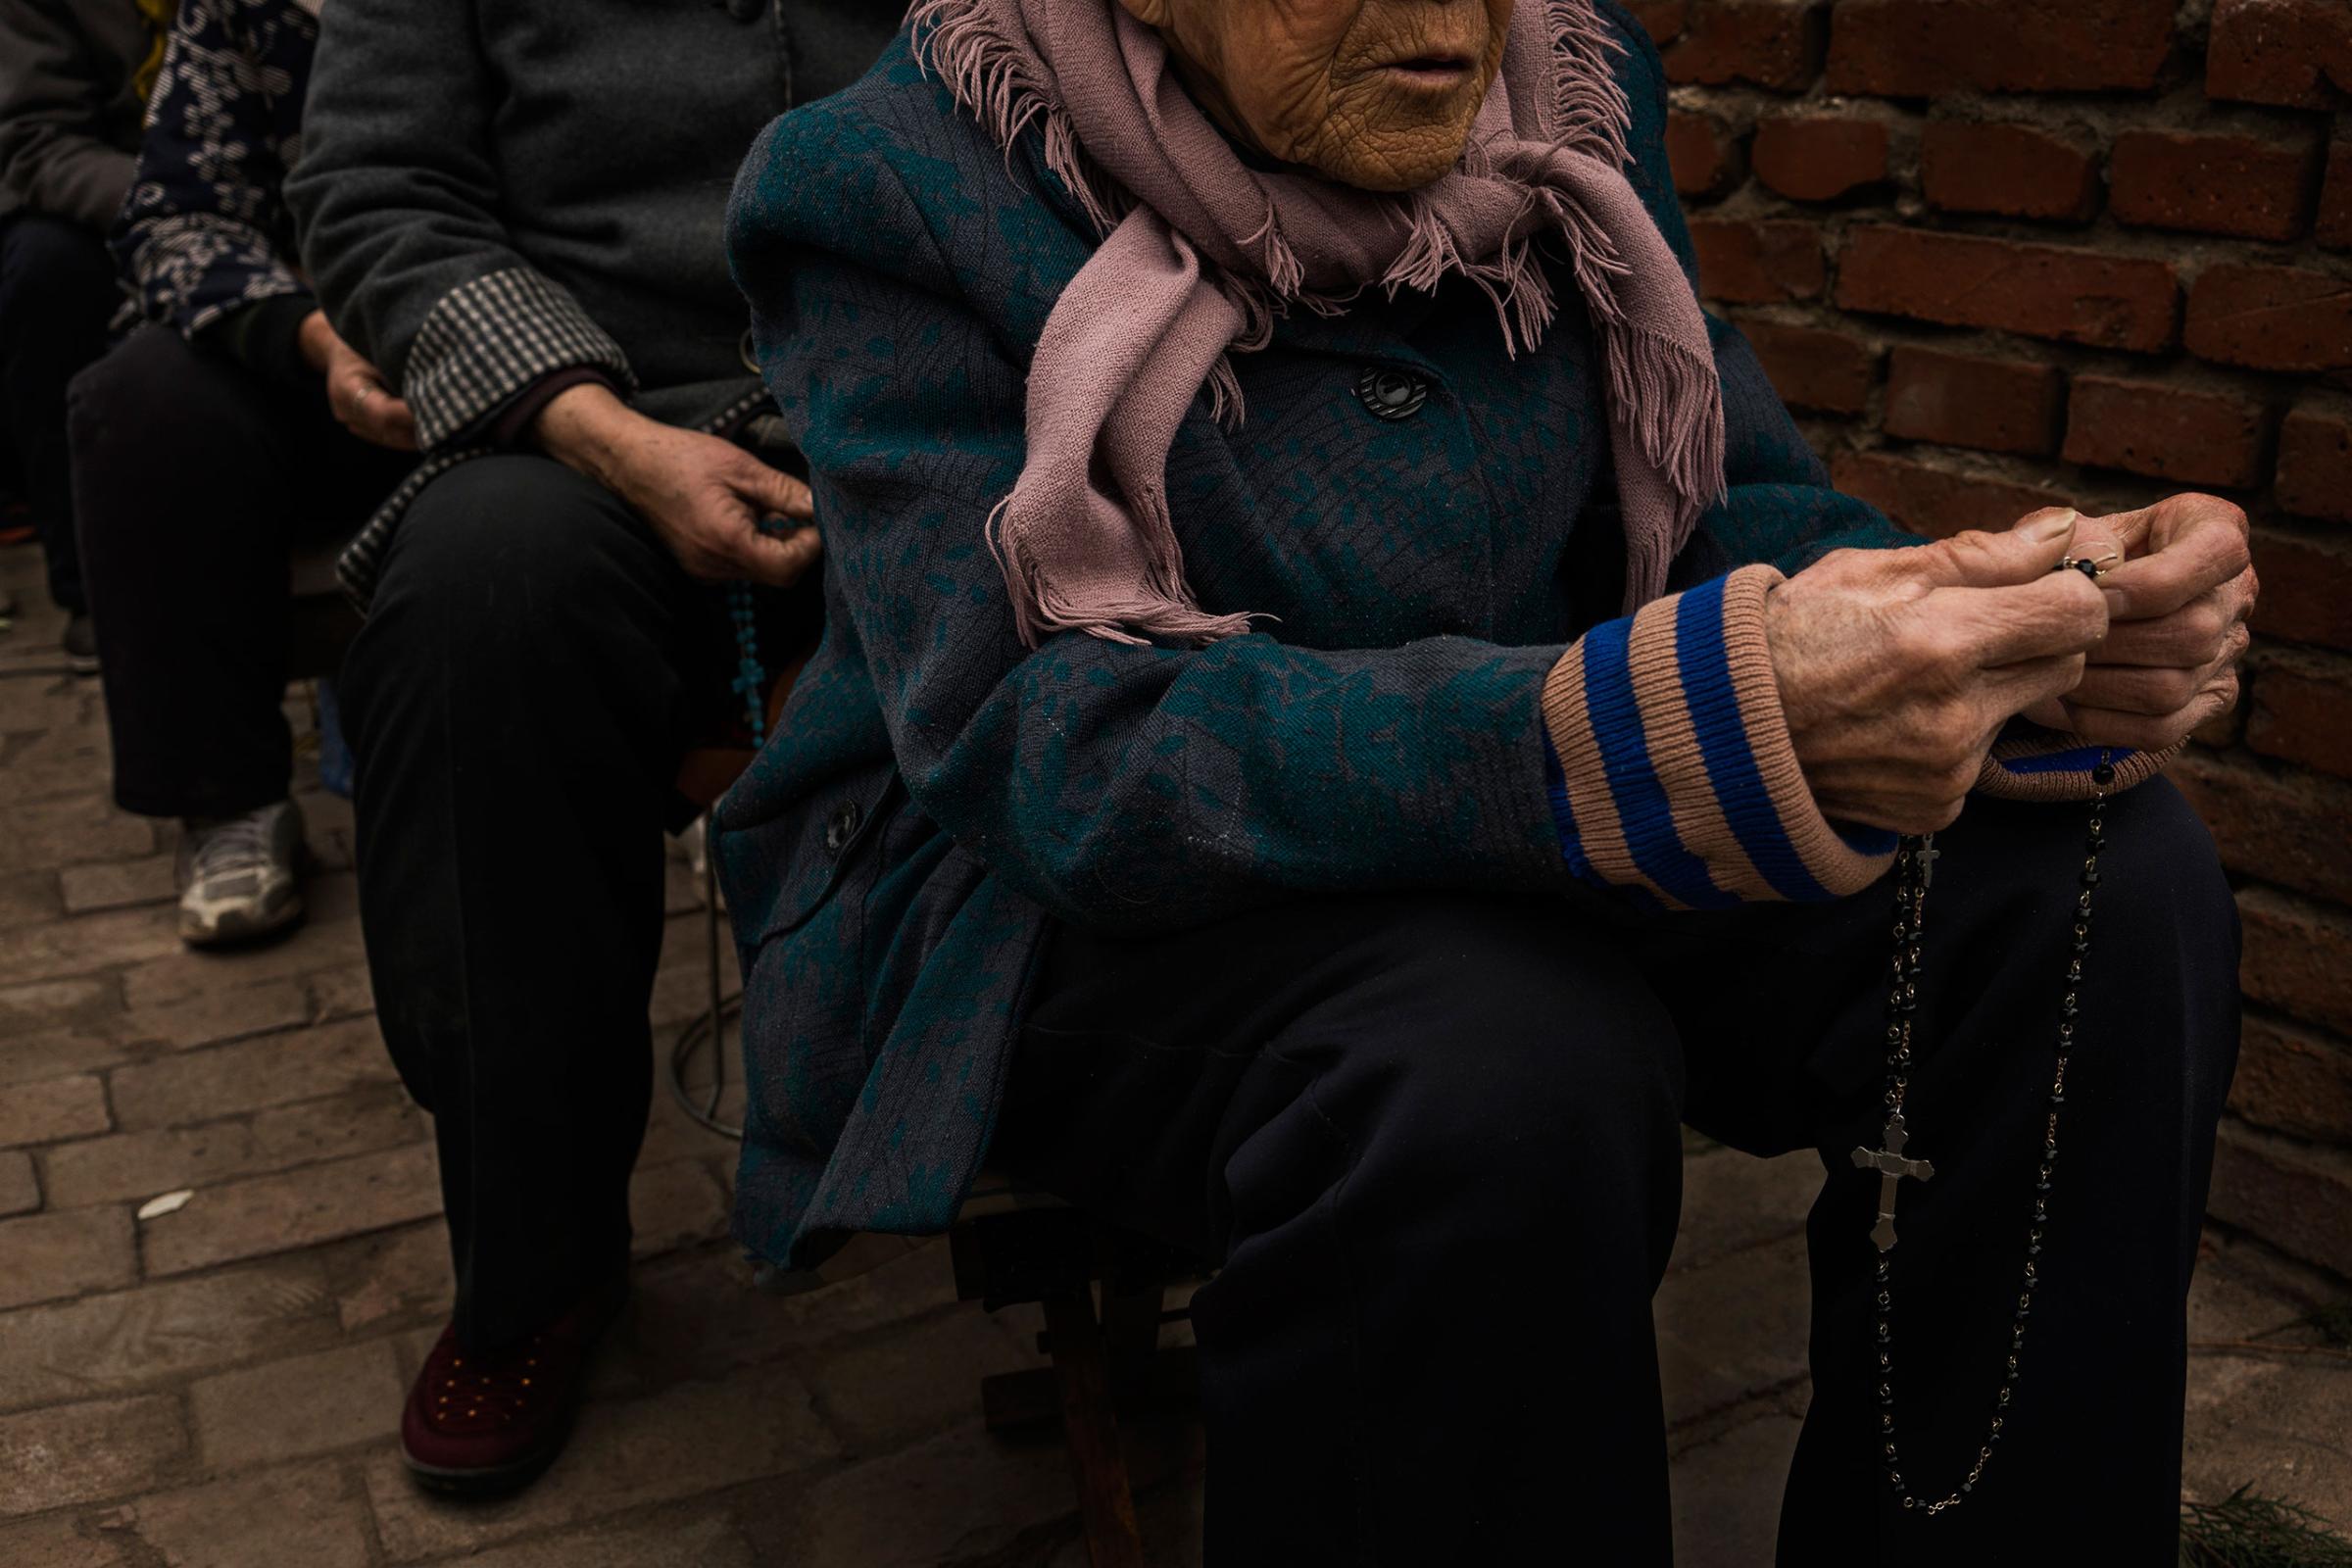 A parishioner thumbs her Rosemary beads during an underground Palm Sunday service in the yard of a house in Youtong village, Shijiazhuang, China, March 20, 2016